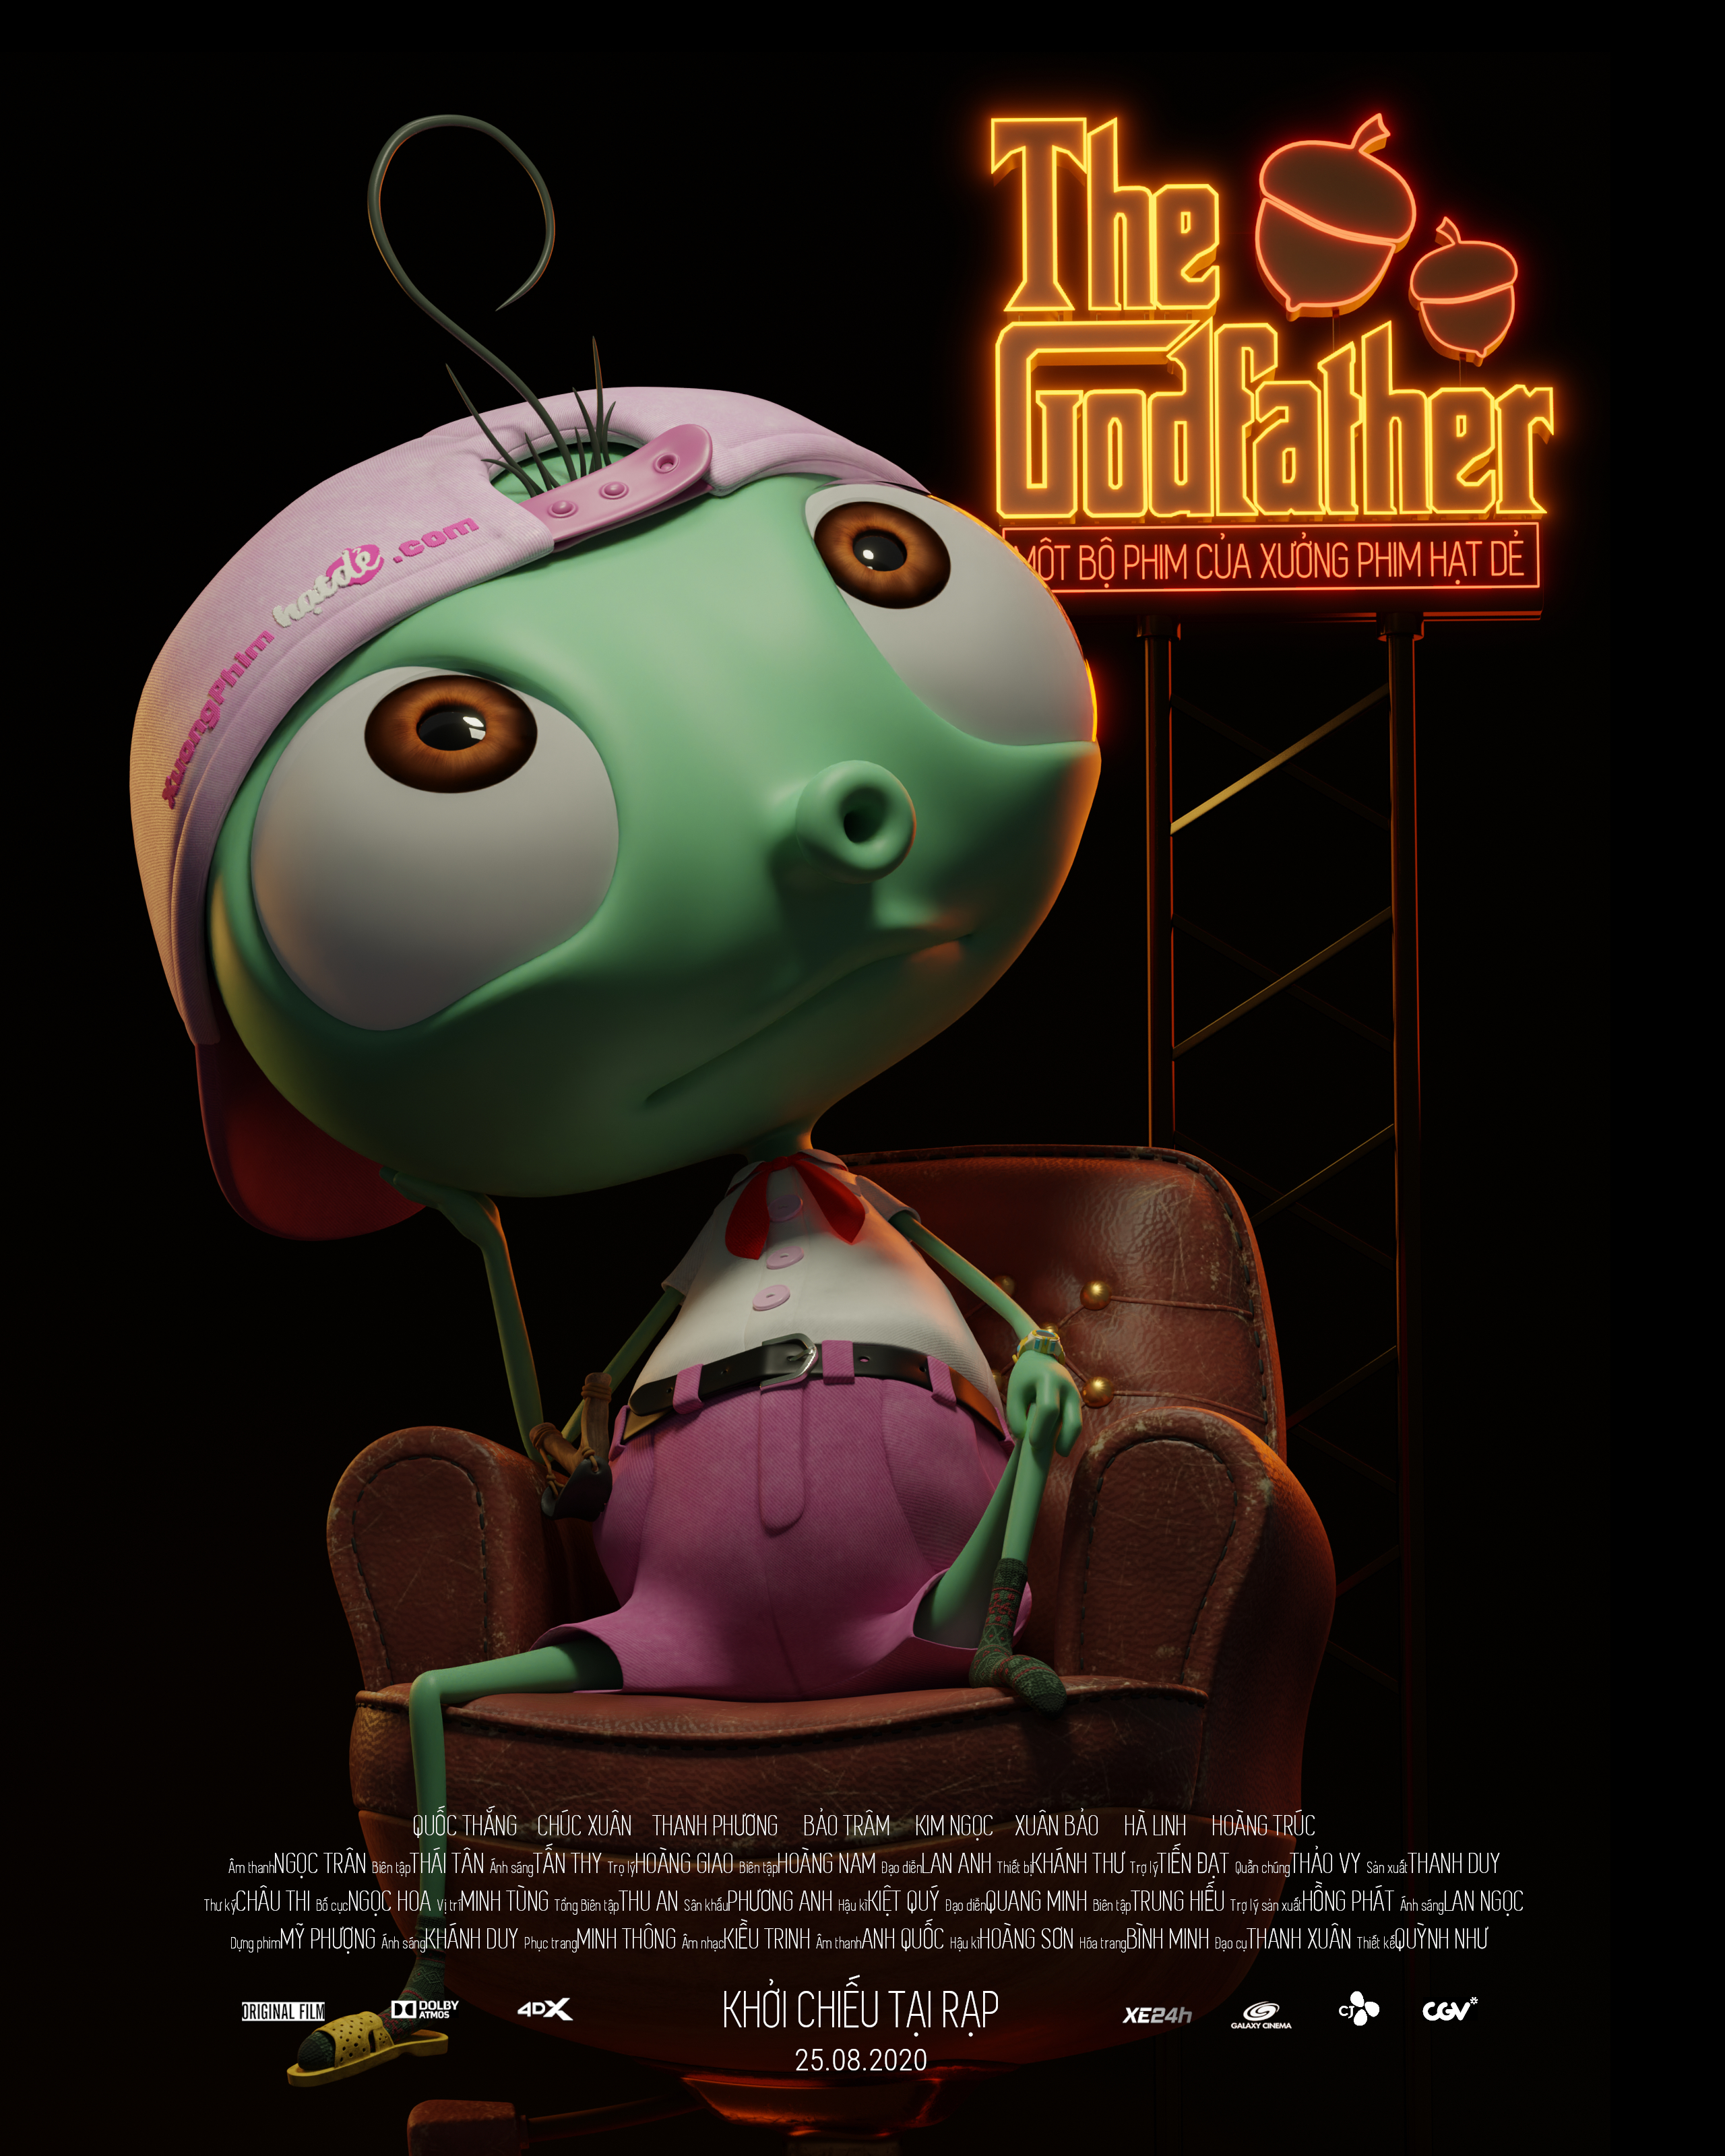 The Godfather version fly cartoon - Finished Projects - Blender Artists  Community